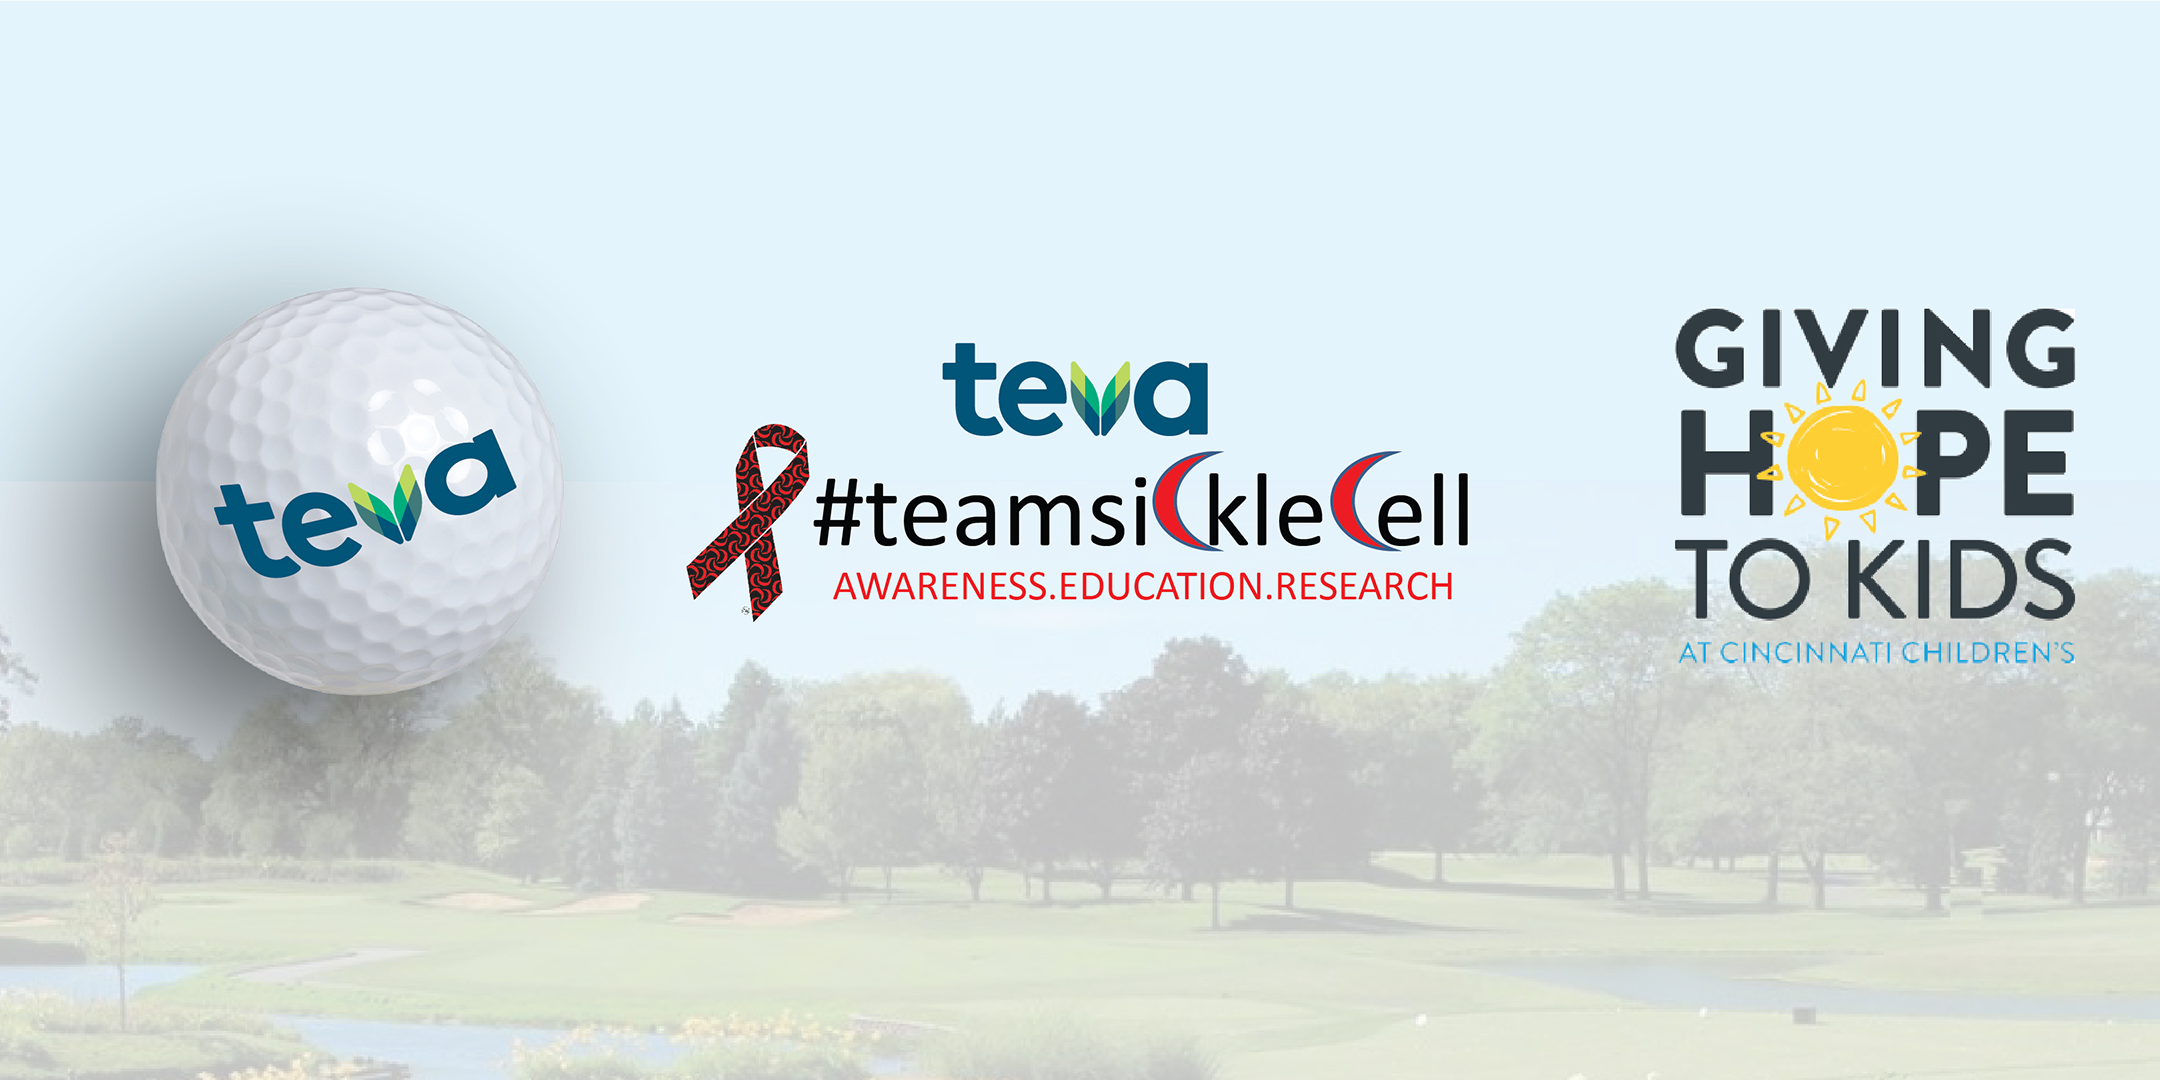 Charity Golf Outing- Sickle Cell Research at Cincinnati Children's Hospital